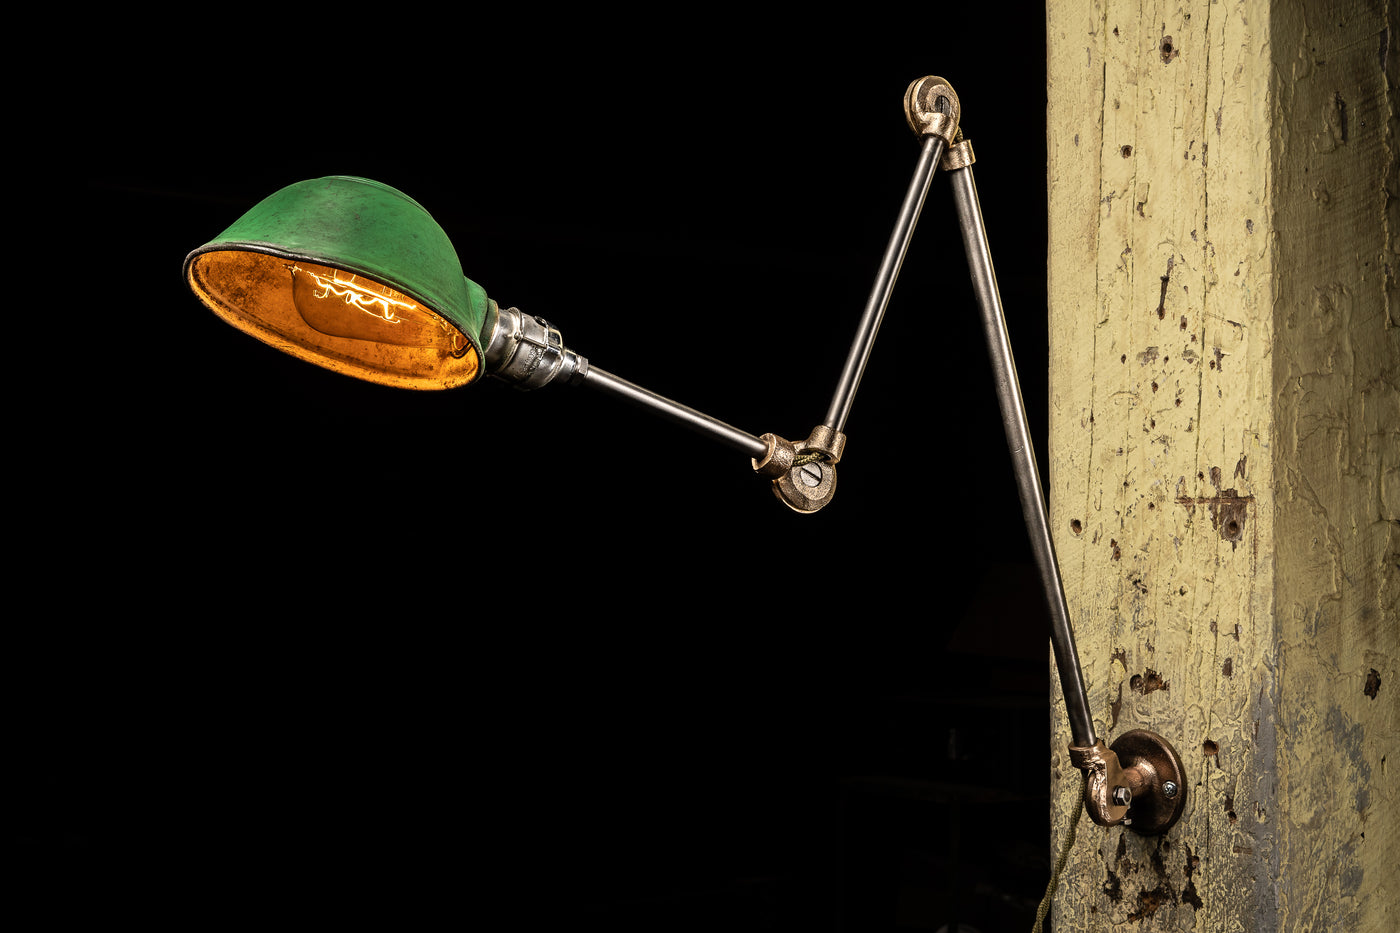 Antique Articulating Task Lamp with Green Shade